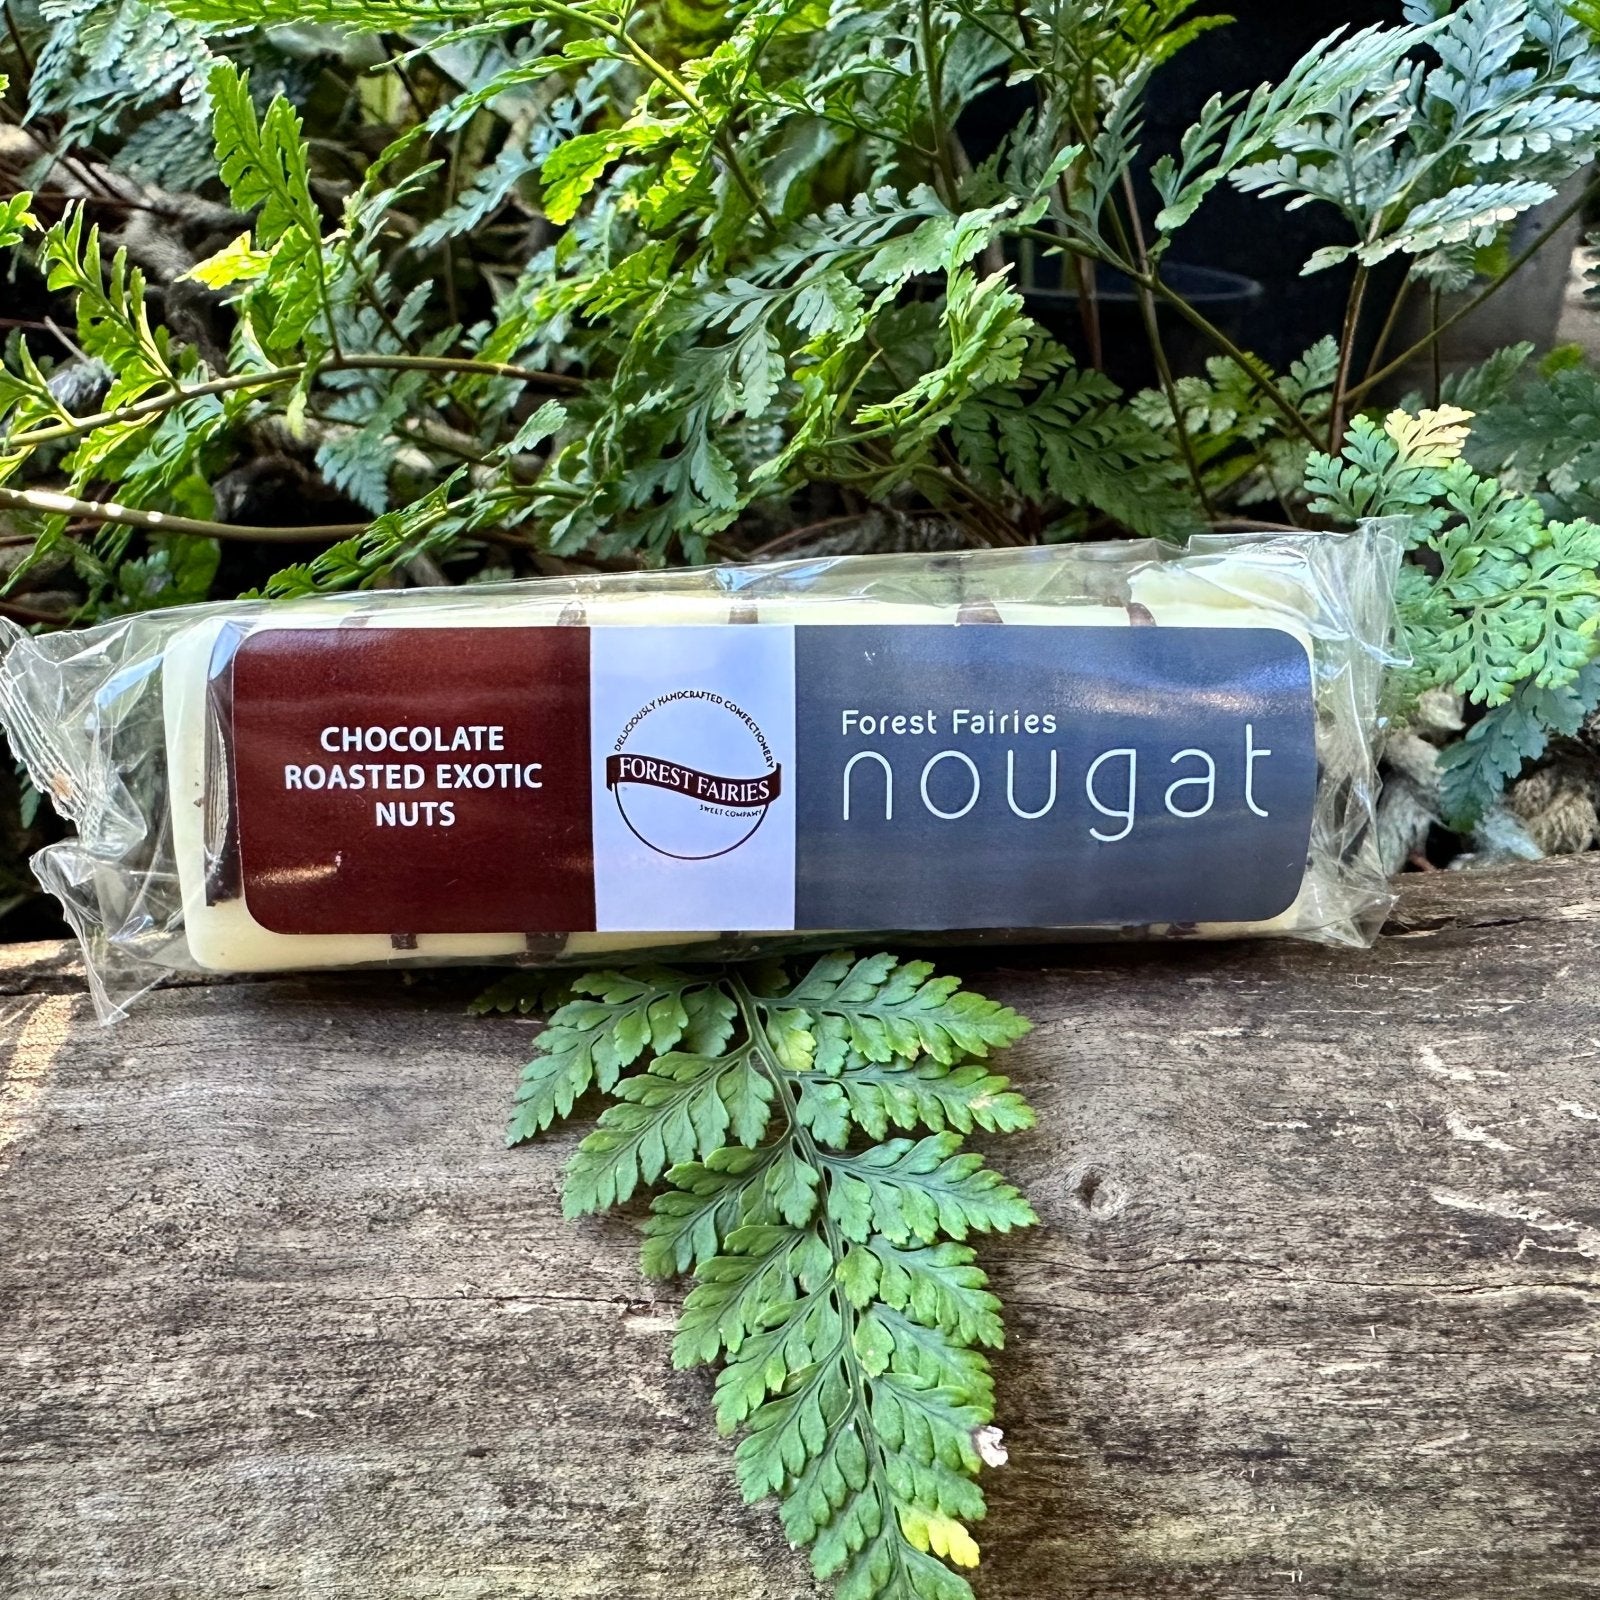 Forest Fairies Nougat - Chocolate Roasted Exotic Nuts - White Chocolate (50g) - The Deli